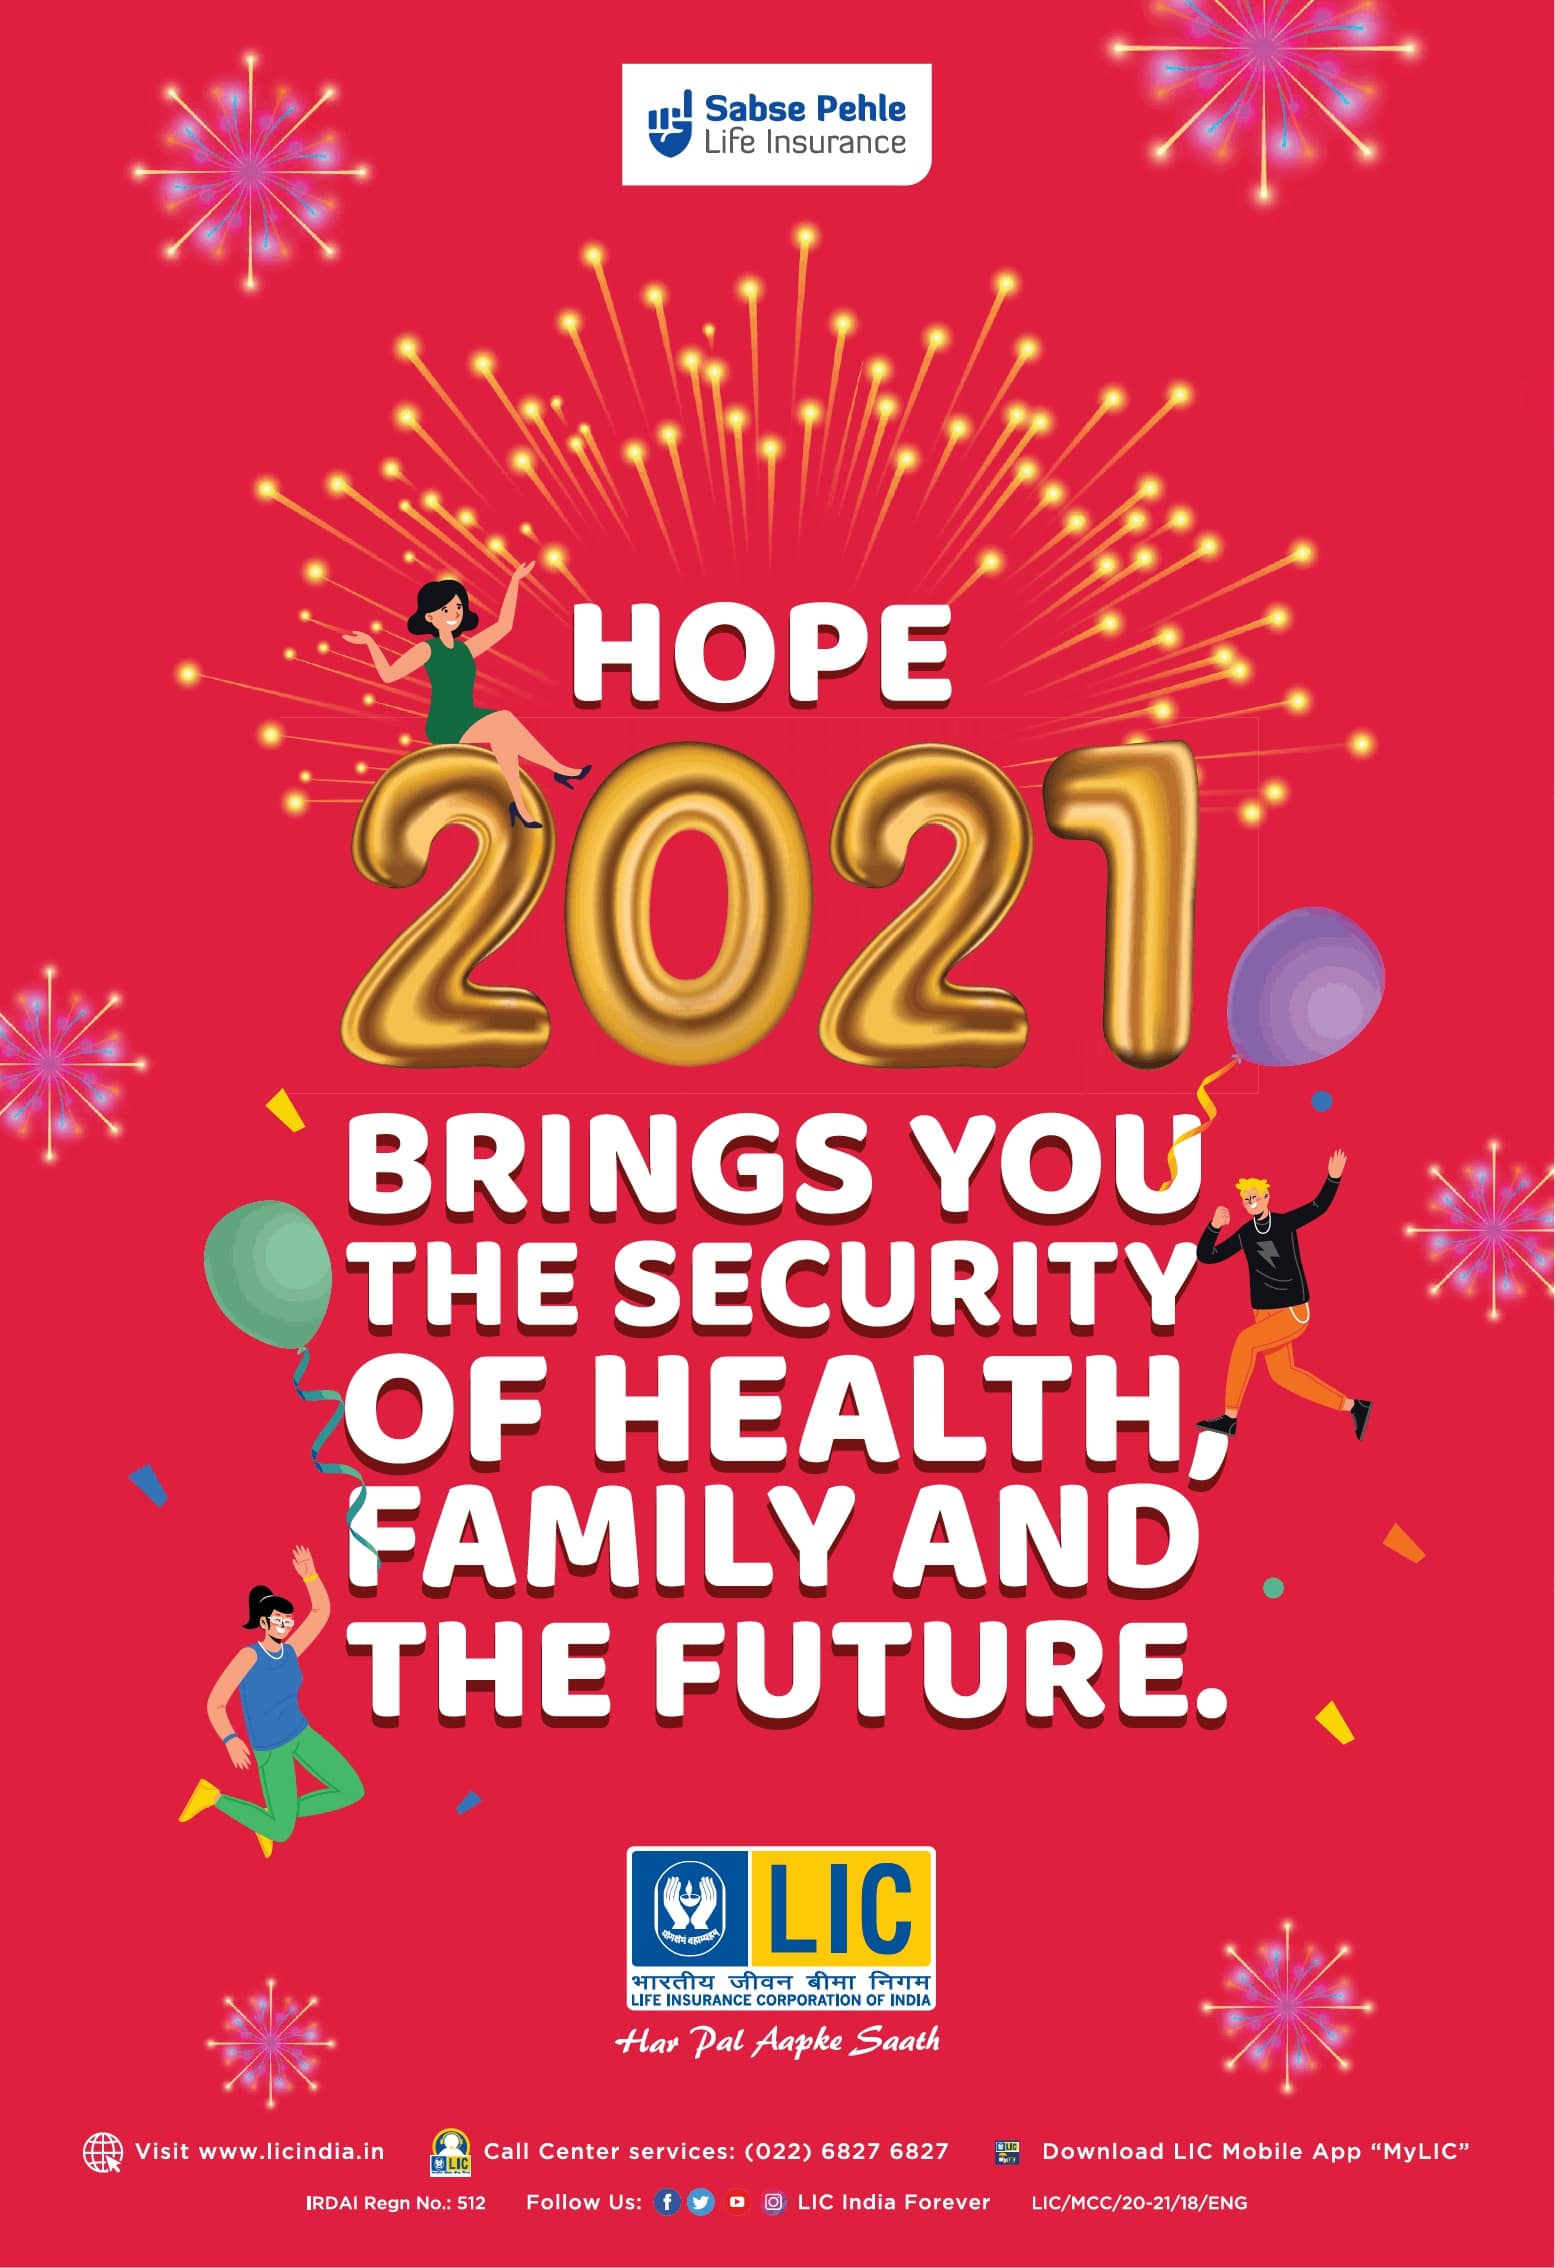 life-insurance-corporation-of-india-hope-2021-brings-you-the-security-of-health-family-and-the-future-ad-times-of-india-mumbai-01-01-2021